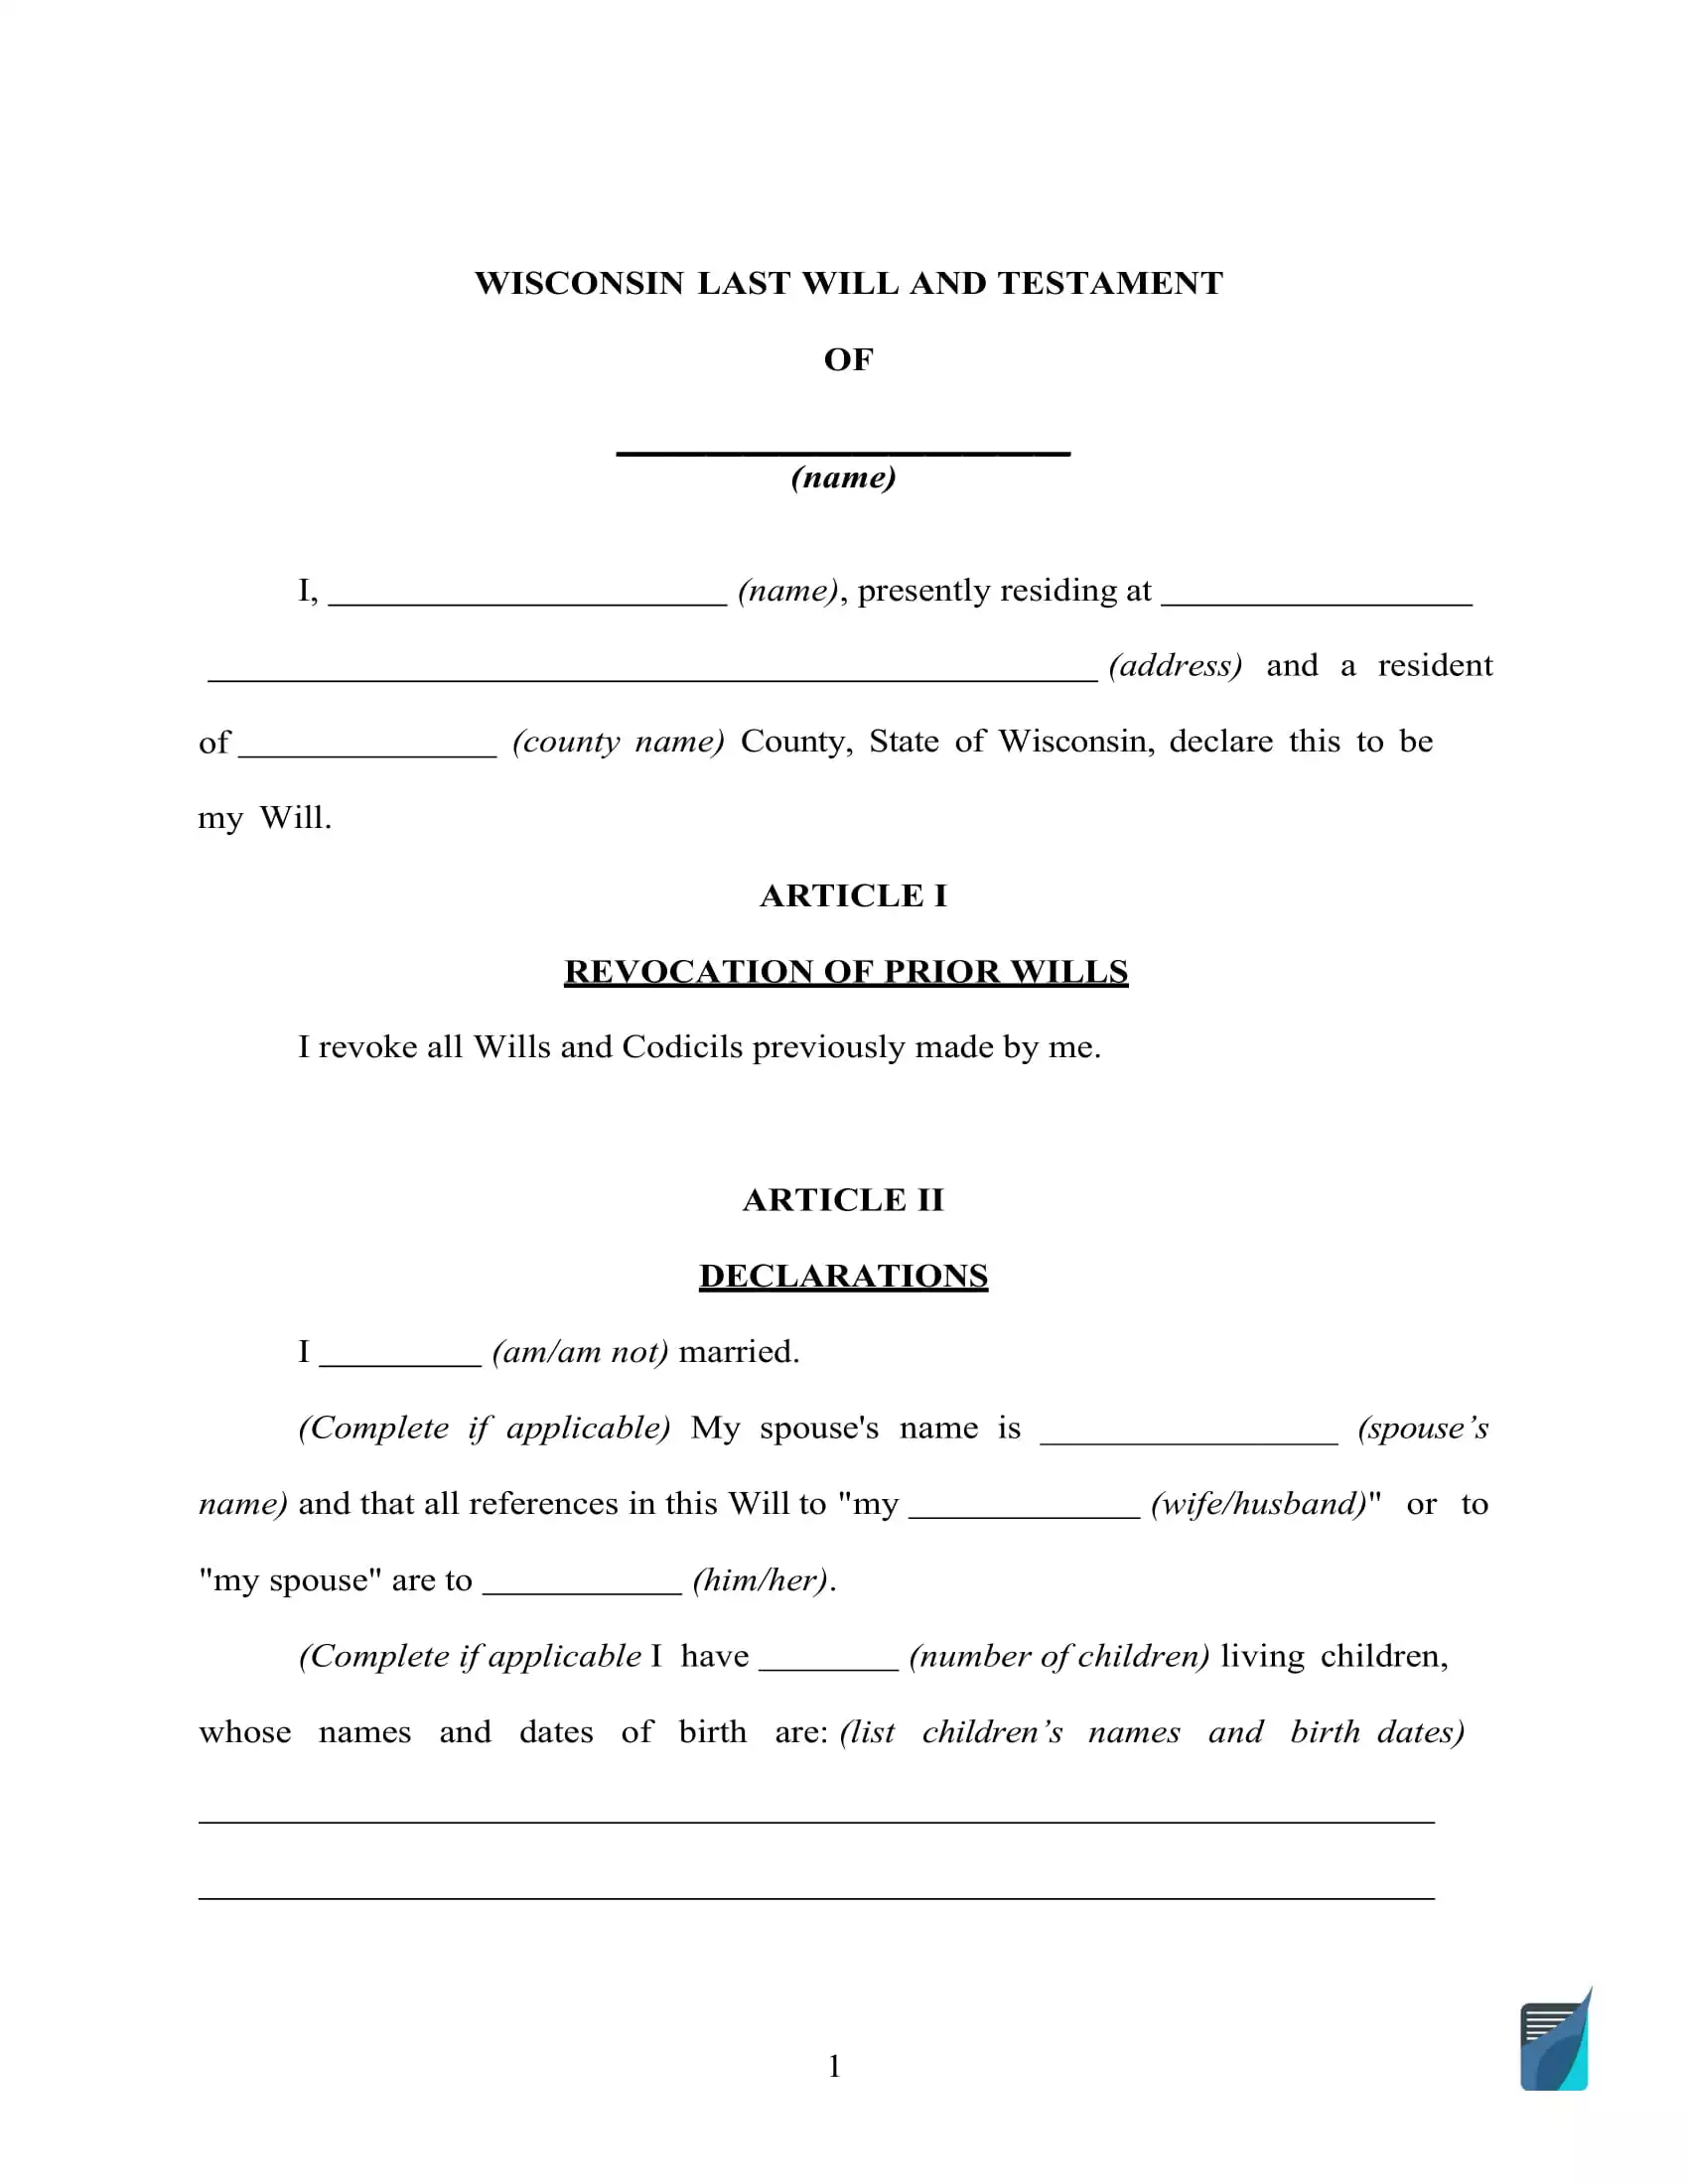 wisconsin-last-will-and-testament-template